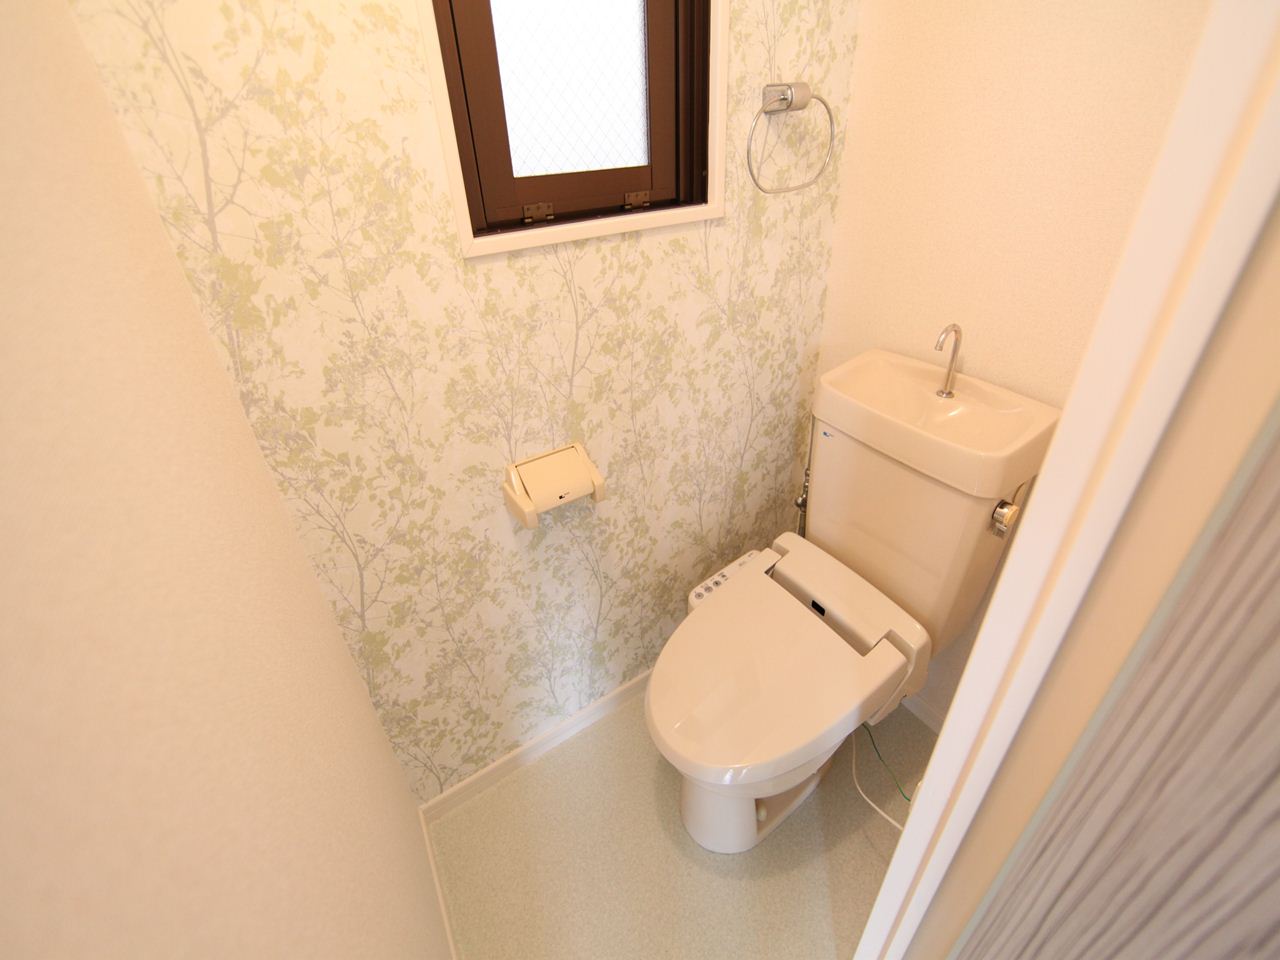 Toilet. Toilet with warm water washing toilet seat With windows (ventilation good)